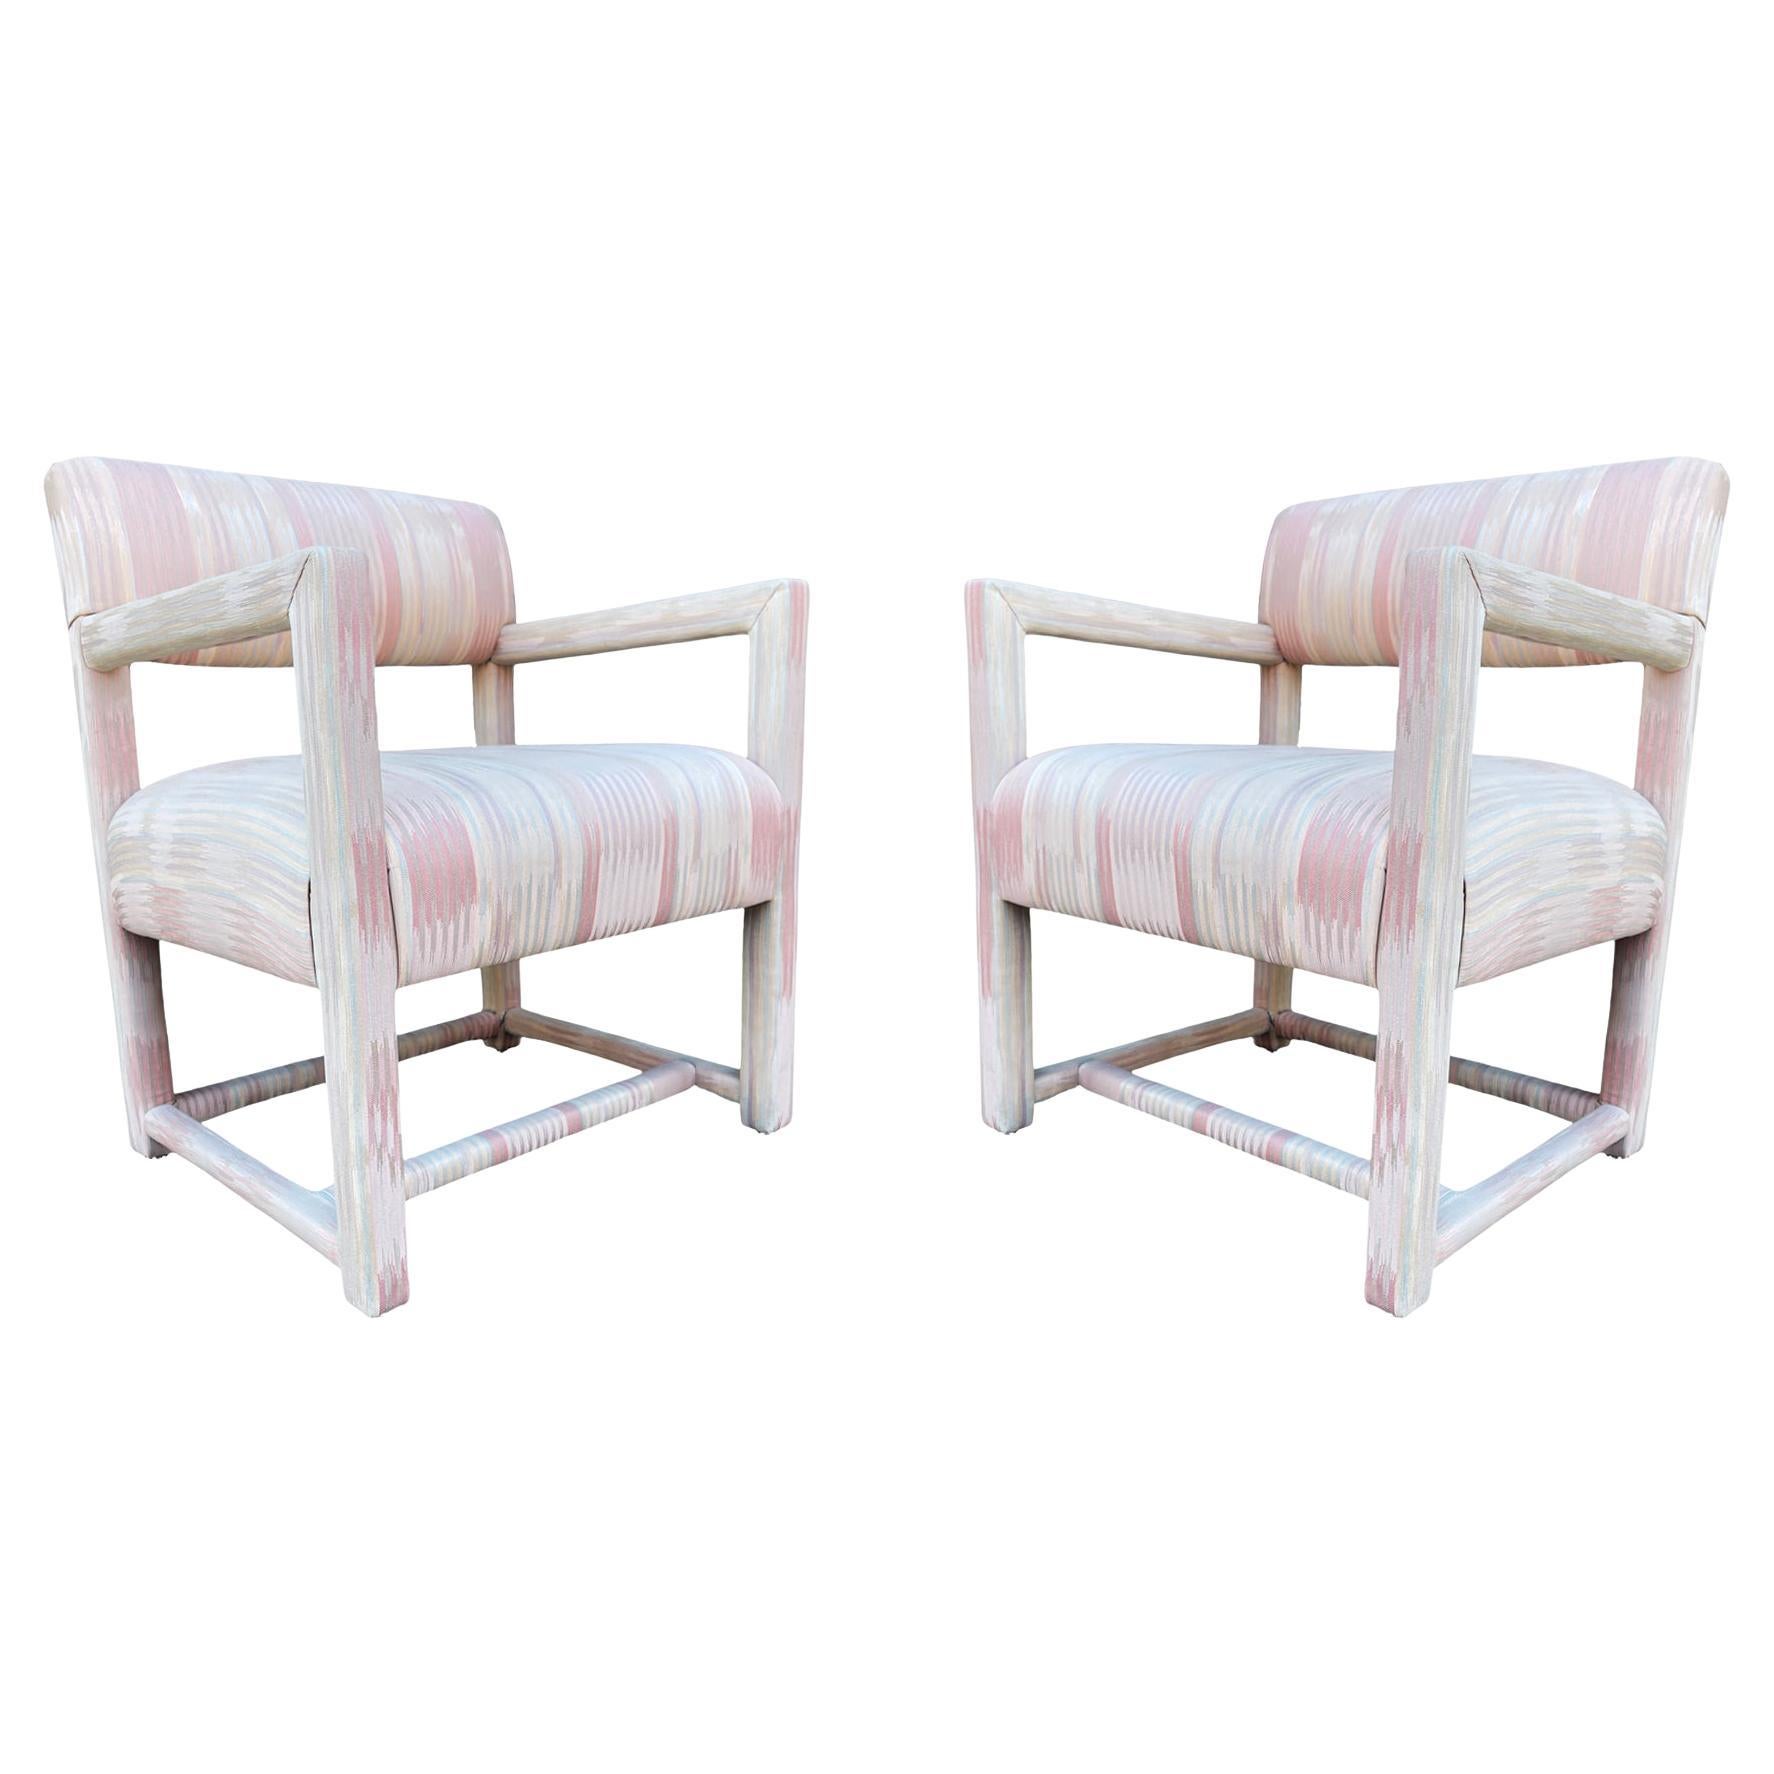 Pair of Mid-Century Modern Parsons Armchair Lounge Chairs after Milo Baughman For Sale